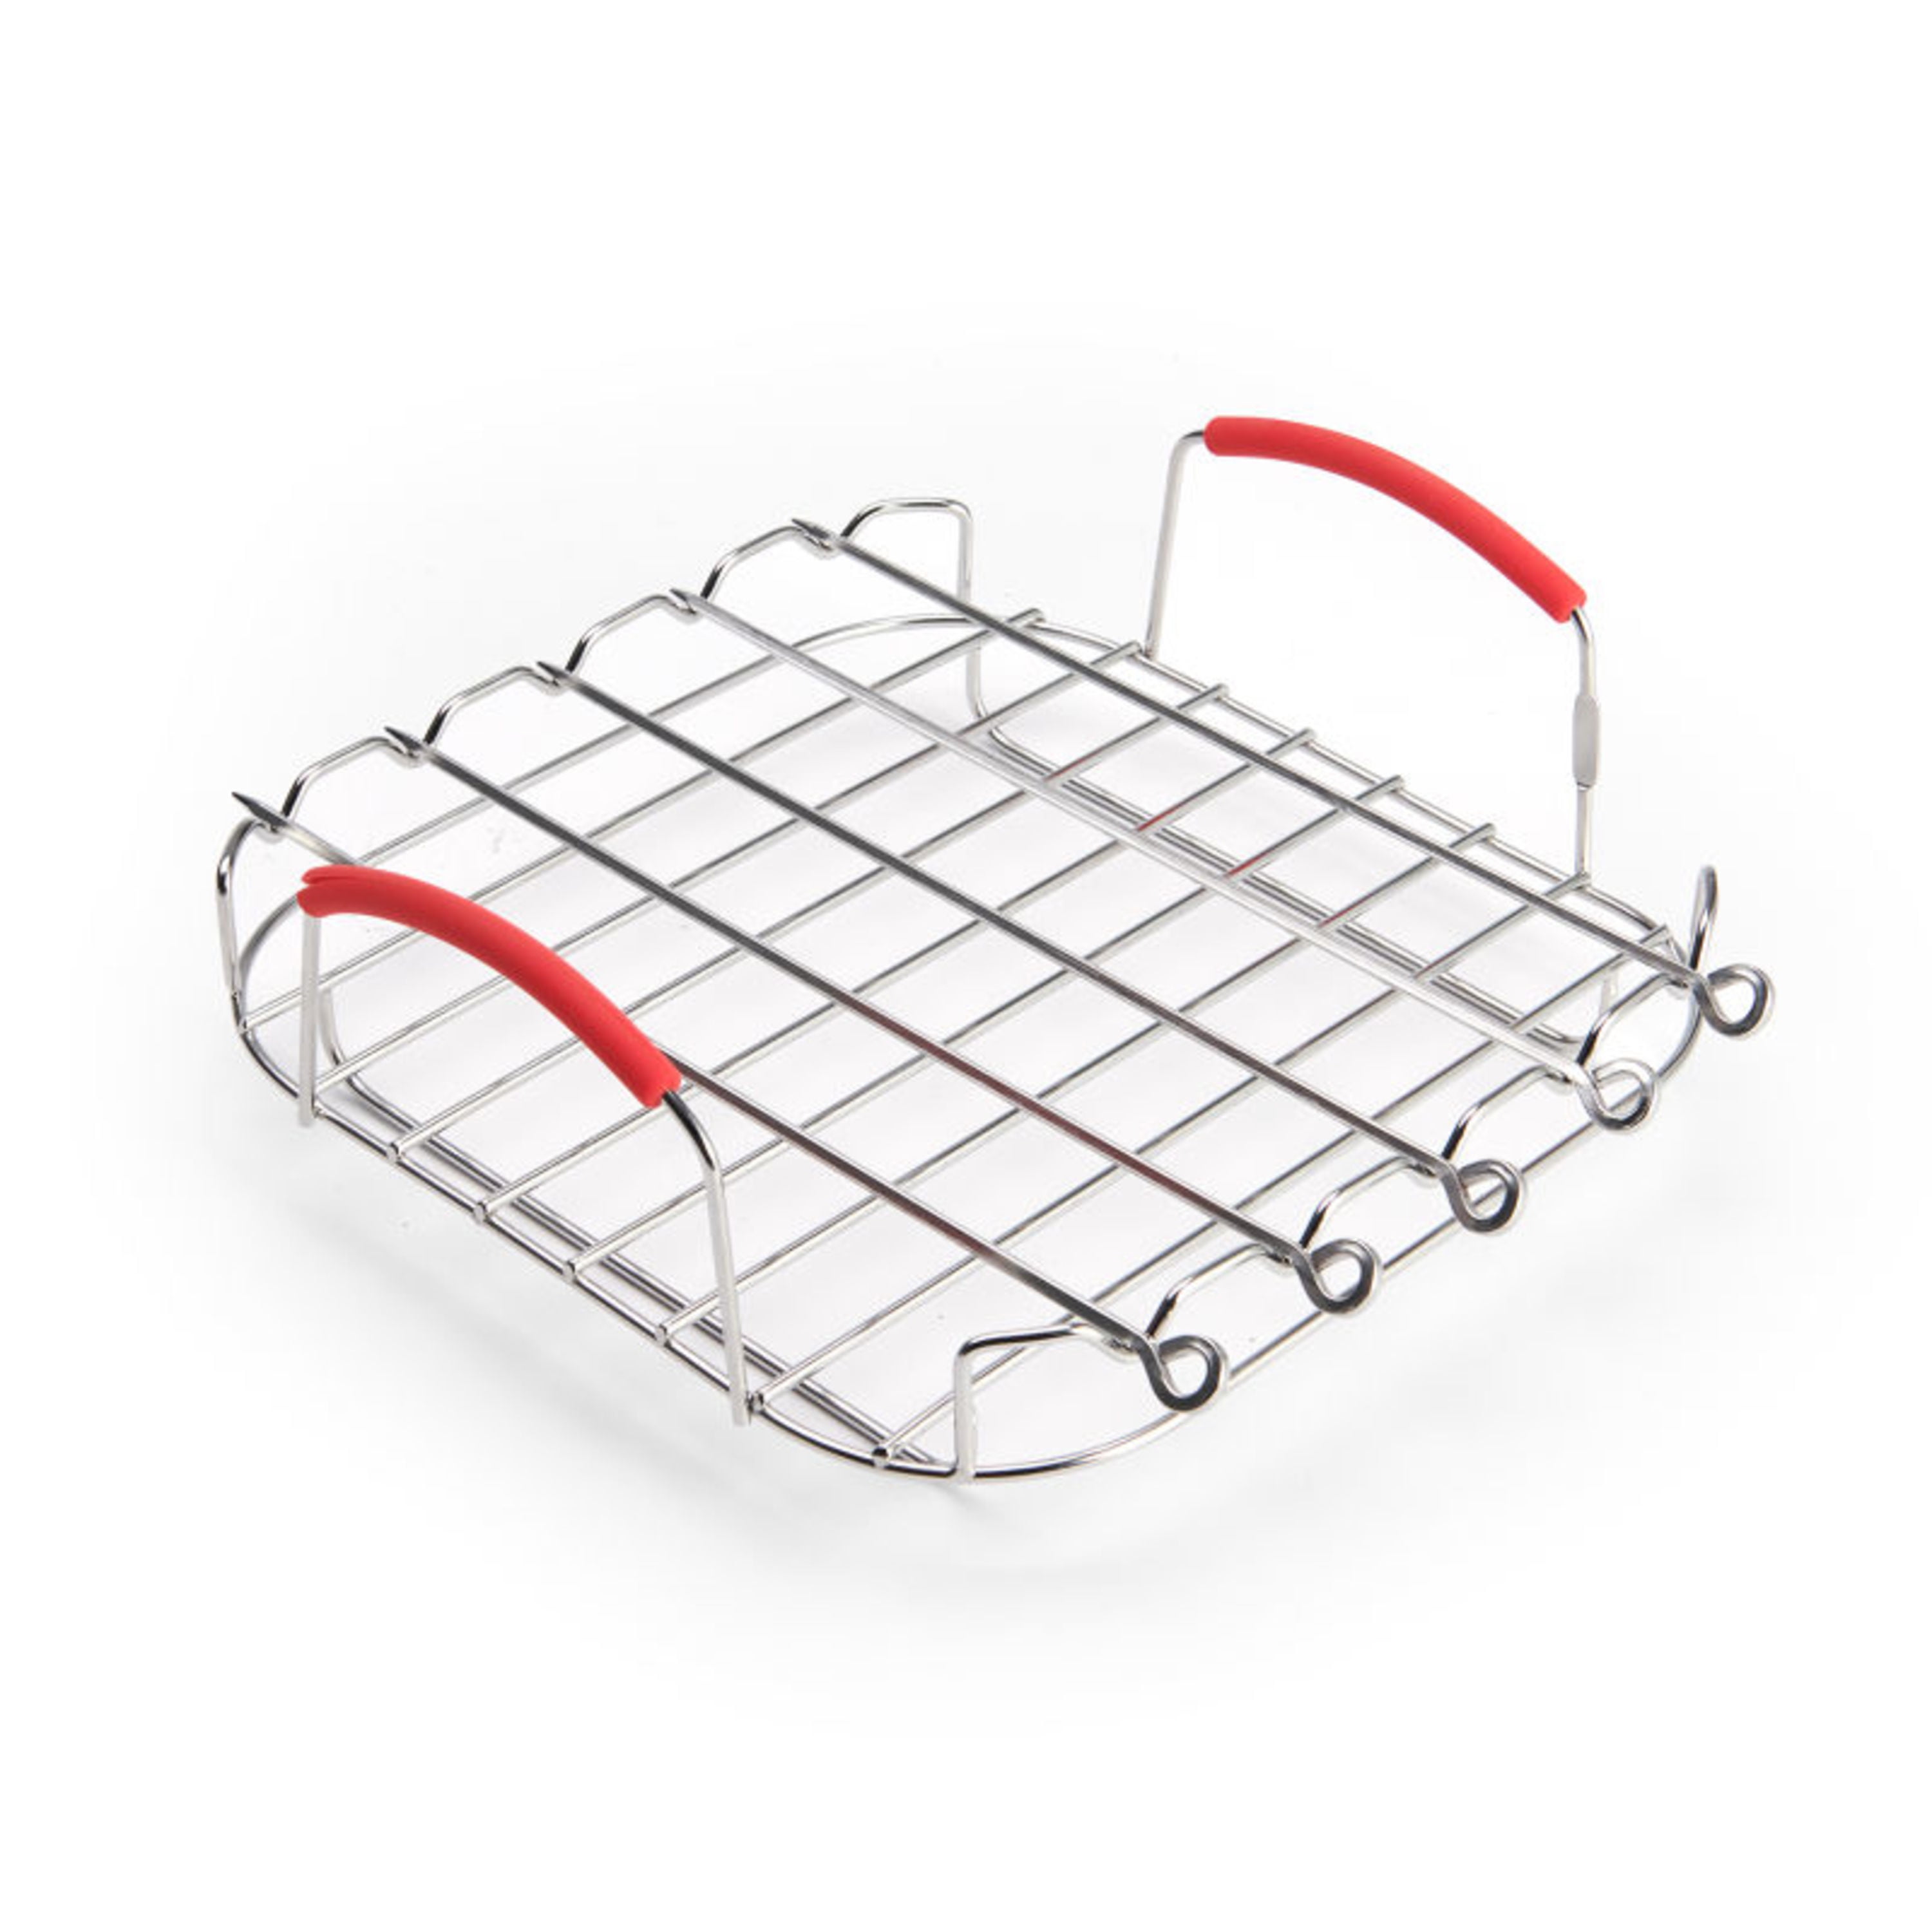 Air Fryer Accessory Rack With Skewer Stainless Steel BBQ Grill Baking  Cooling Steaming Rack Pan Diameter 16/17.8/18/20/22 CM - Buy Air Fryer  Accessory Rack With Skewer Stainless Steel BBQ Grill Baking Cooling